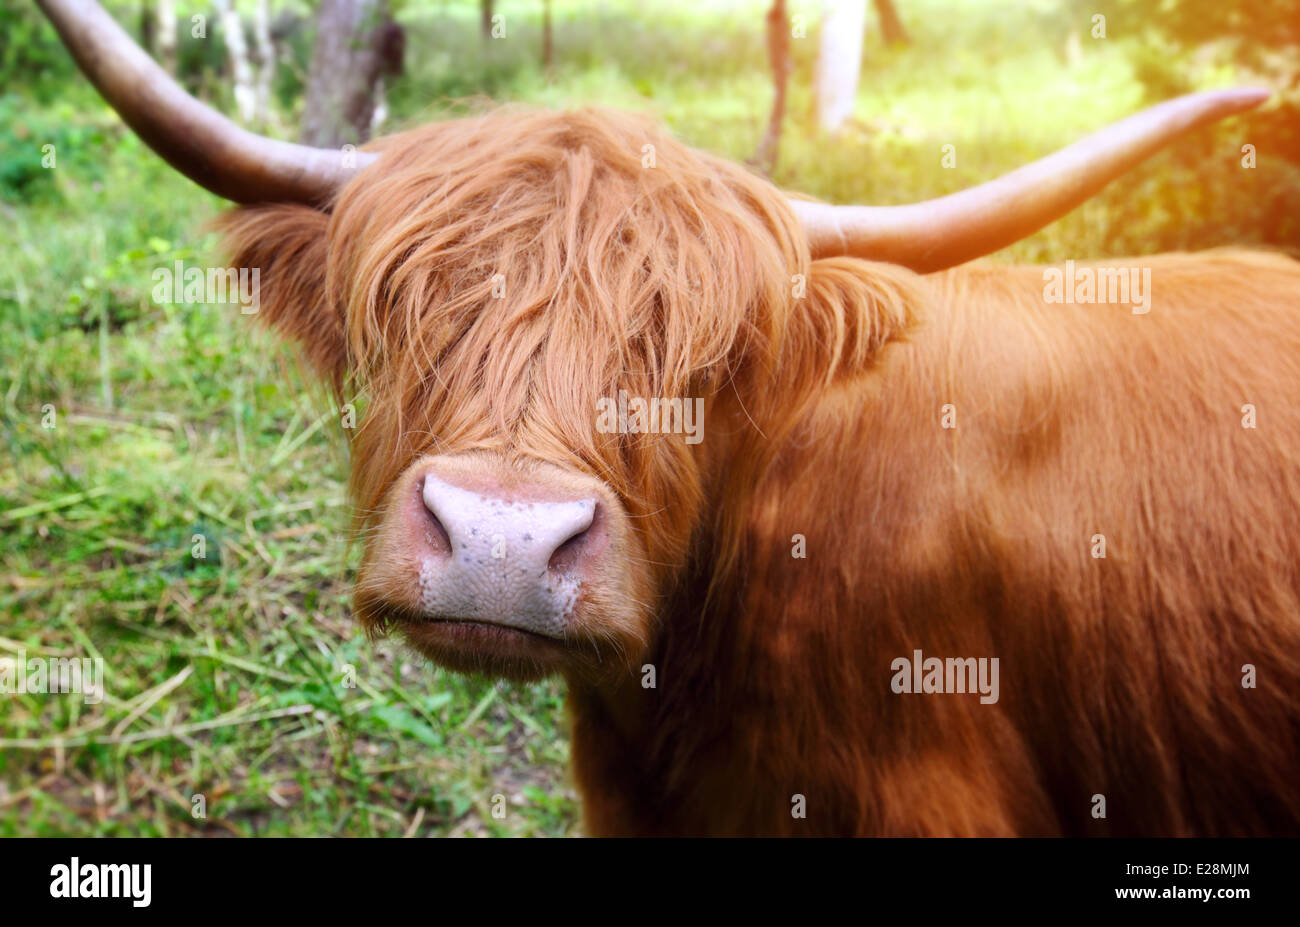 Longhaired cattle up close. Stock Photo